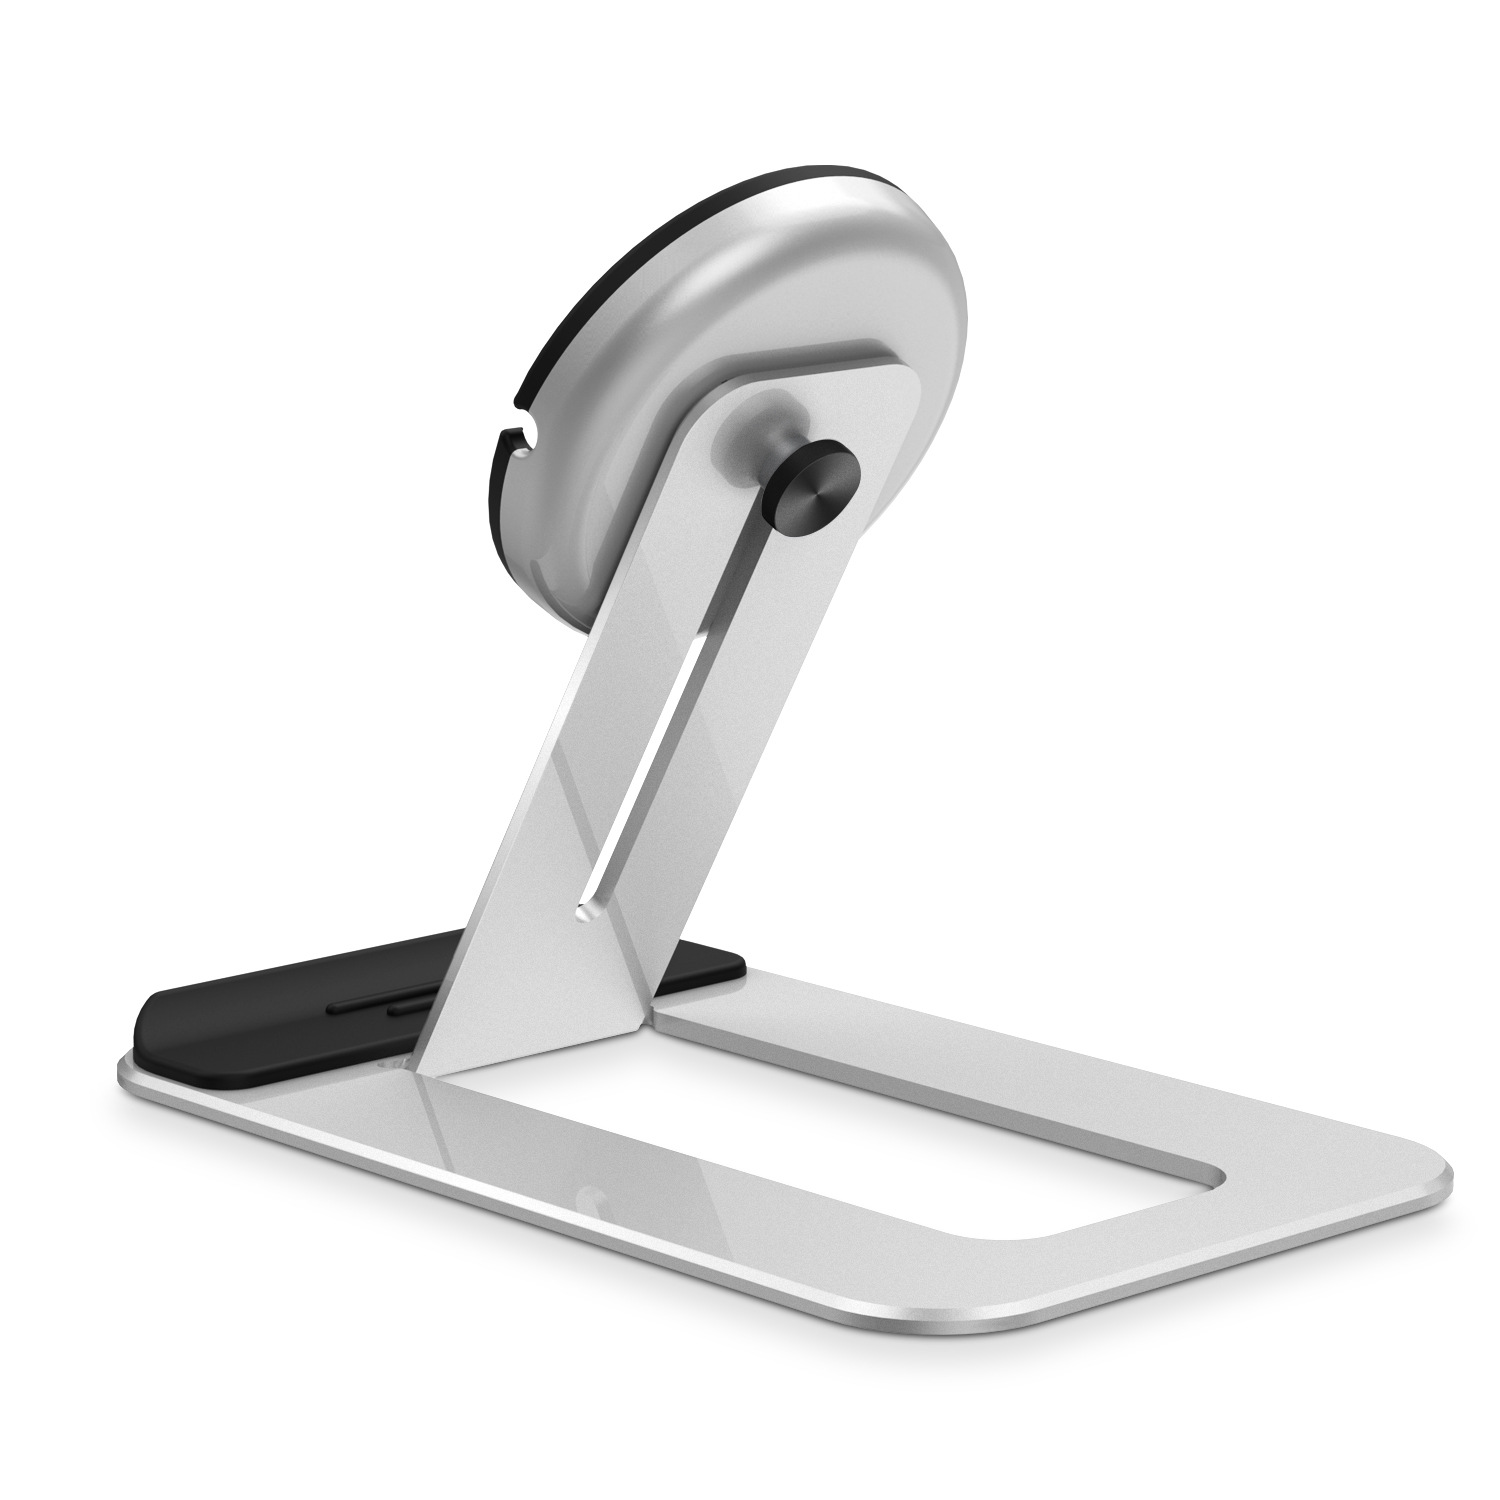 Bakeey Universal Adjustable Height of MagSafe Wireless Charger Base Mount Aluminium Alloy Desktop Holder for iPhone 12 Series